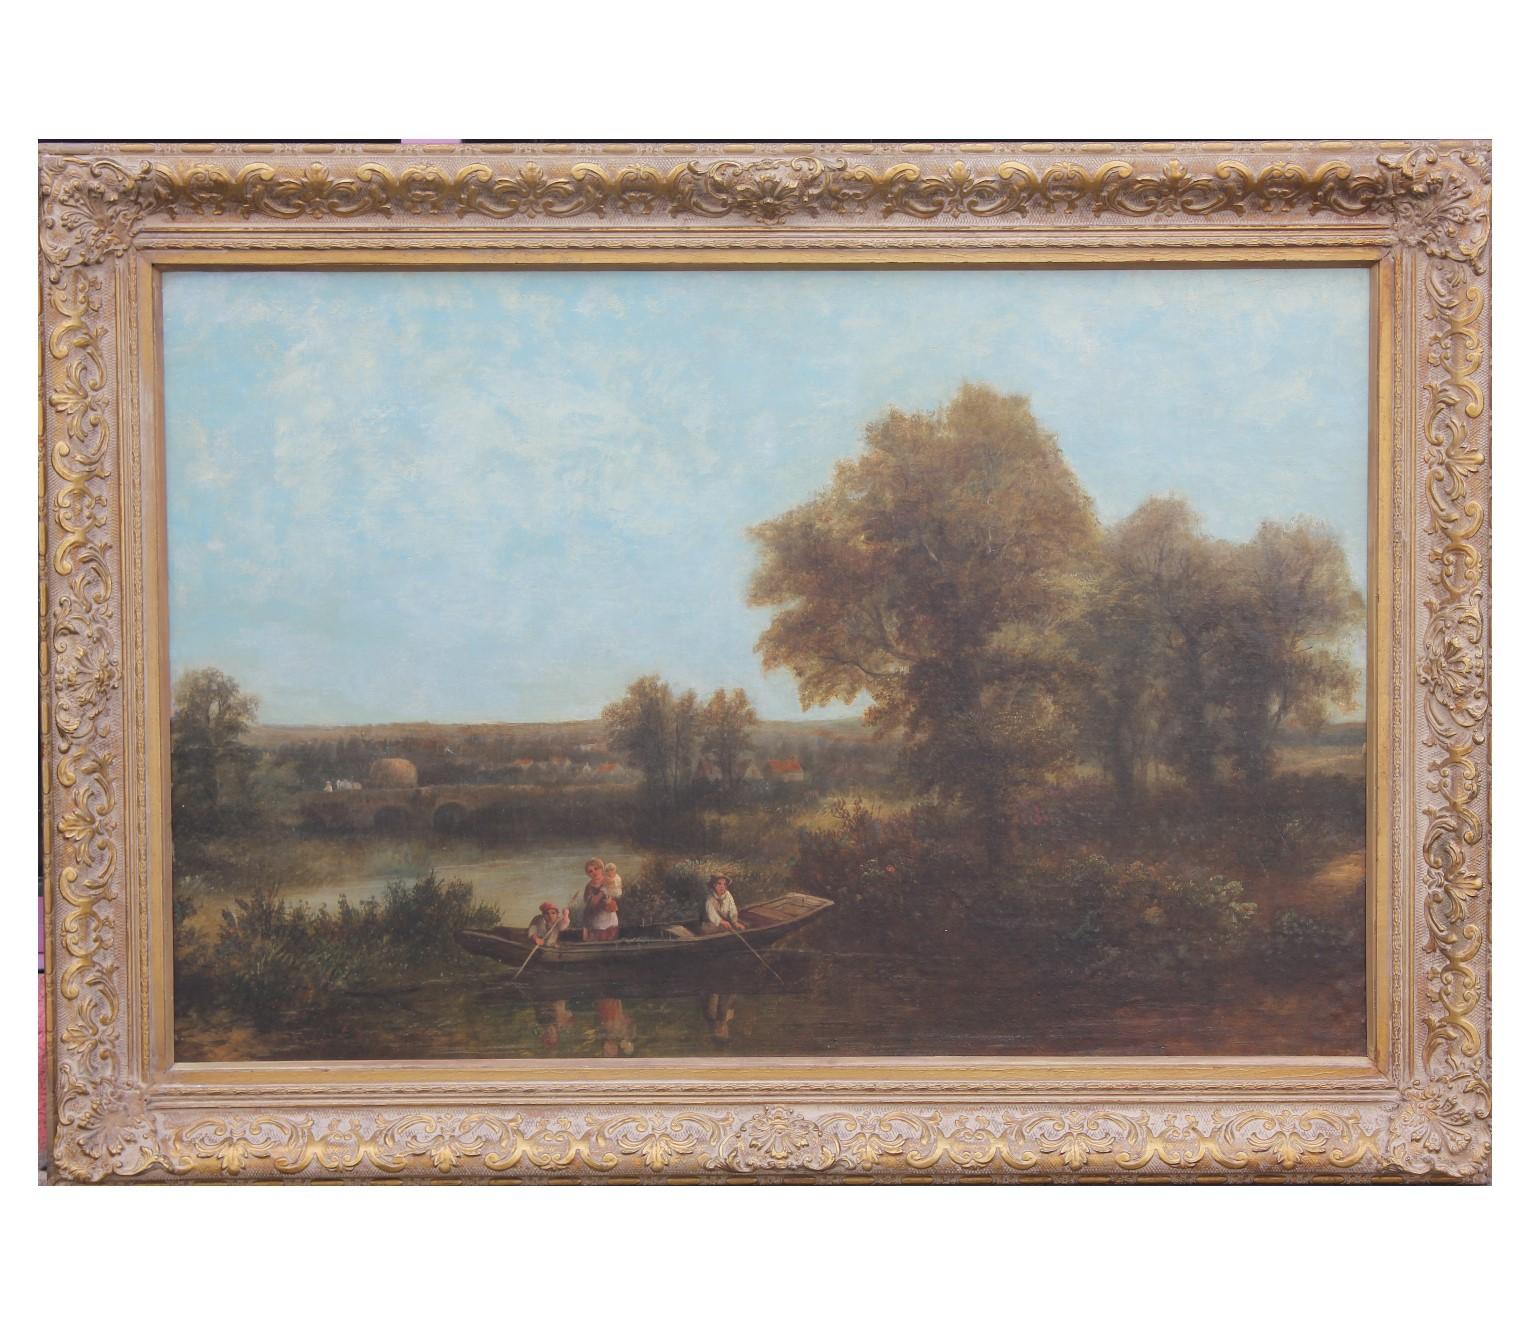 Unknown Figurative Painting - Naturalistic Landscape with Figures on a Boat